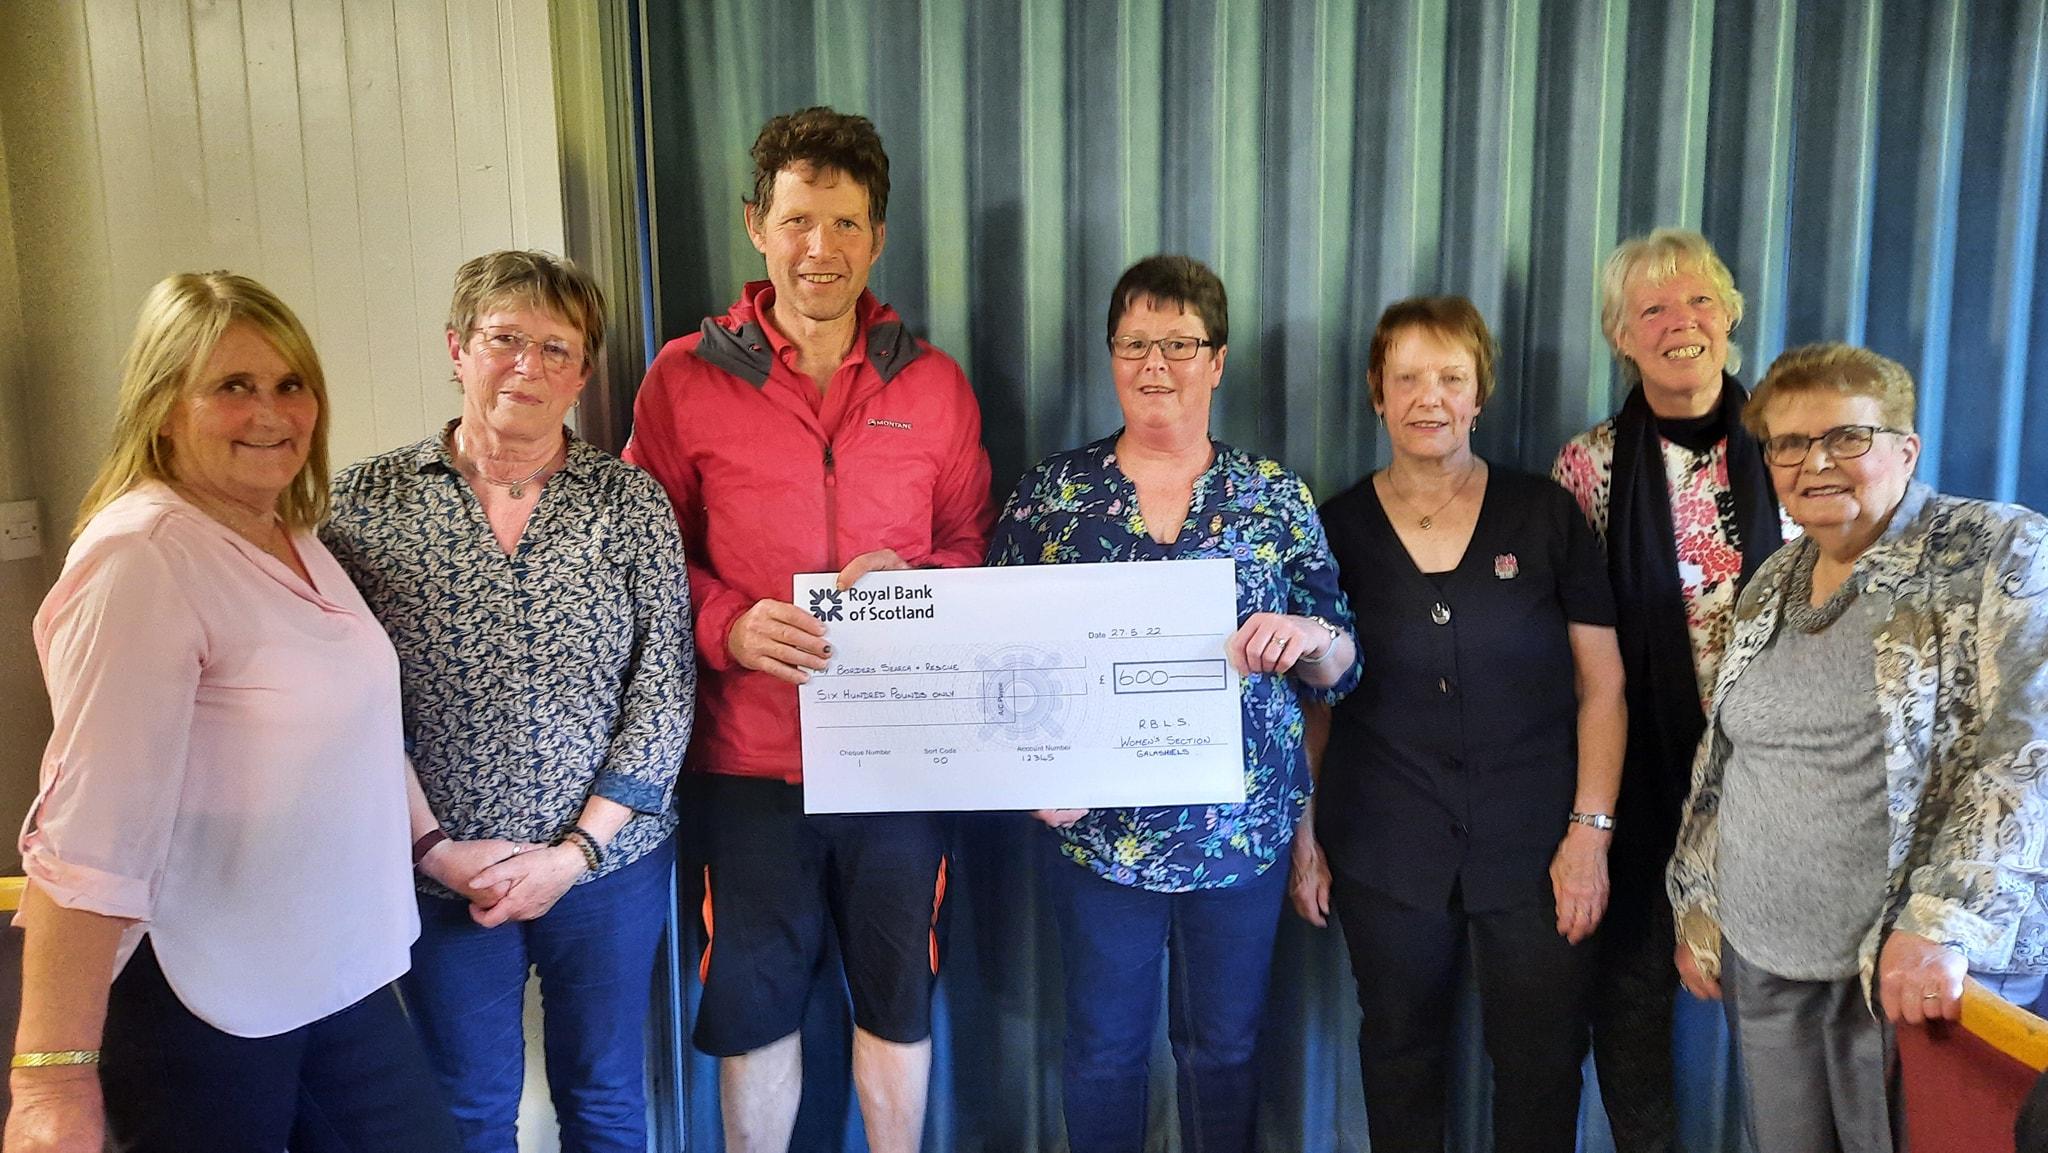 Duncan receives cheque from RBLS Women's Section Galashiels Branch